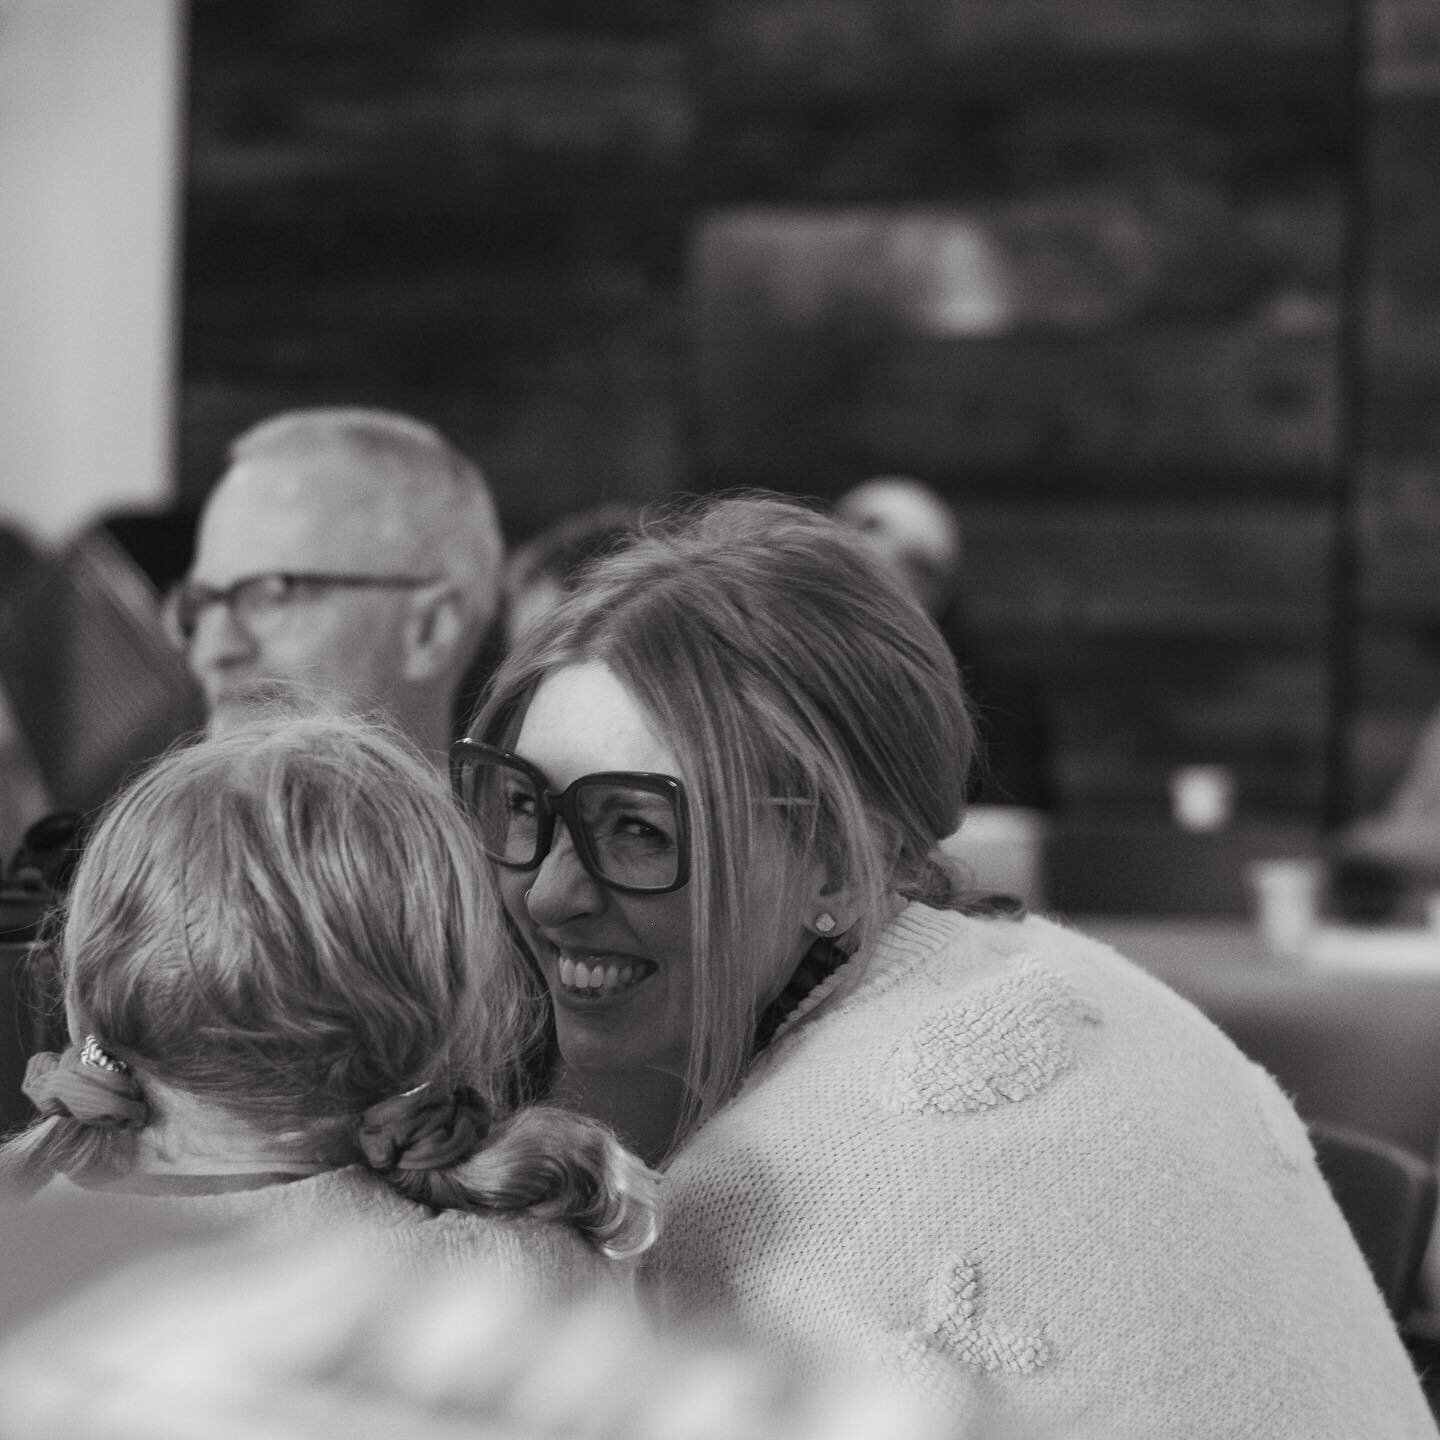 It&rsquo;s Mothers Day this Sunday! We want to celebrate all mothers in our community and make them feel treasured and loved. Big shoutout to all of you strong moms! 🙌🏻💃

This Sunday we are gathering in Copper Hall at 10:30am. We are looking forwa